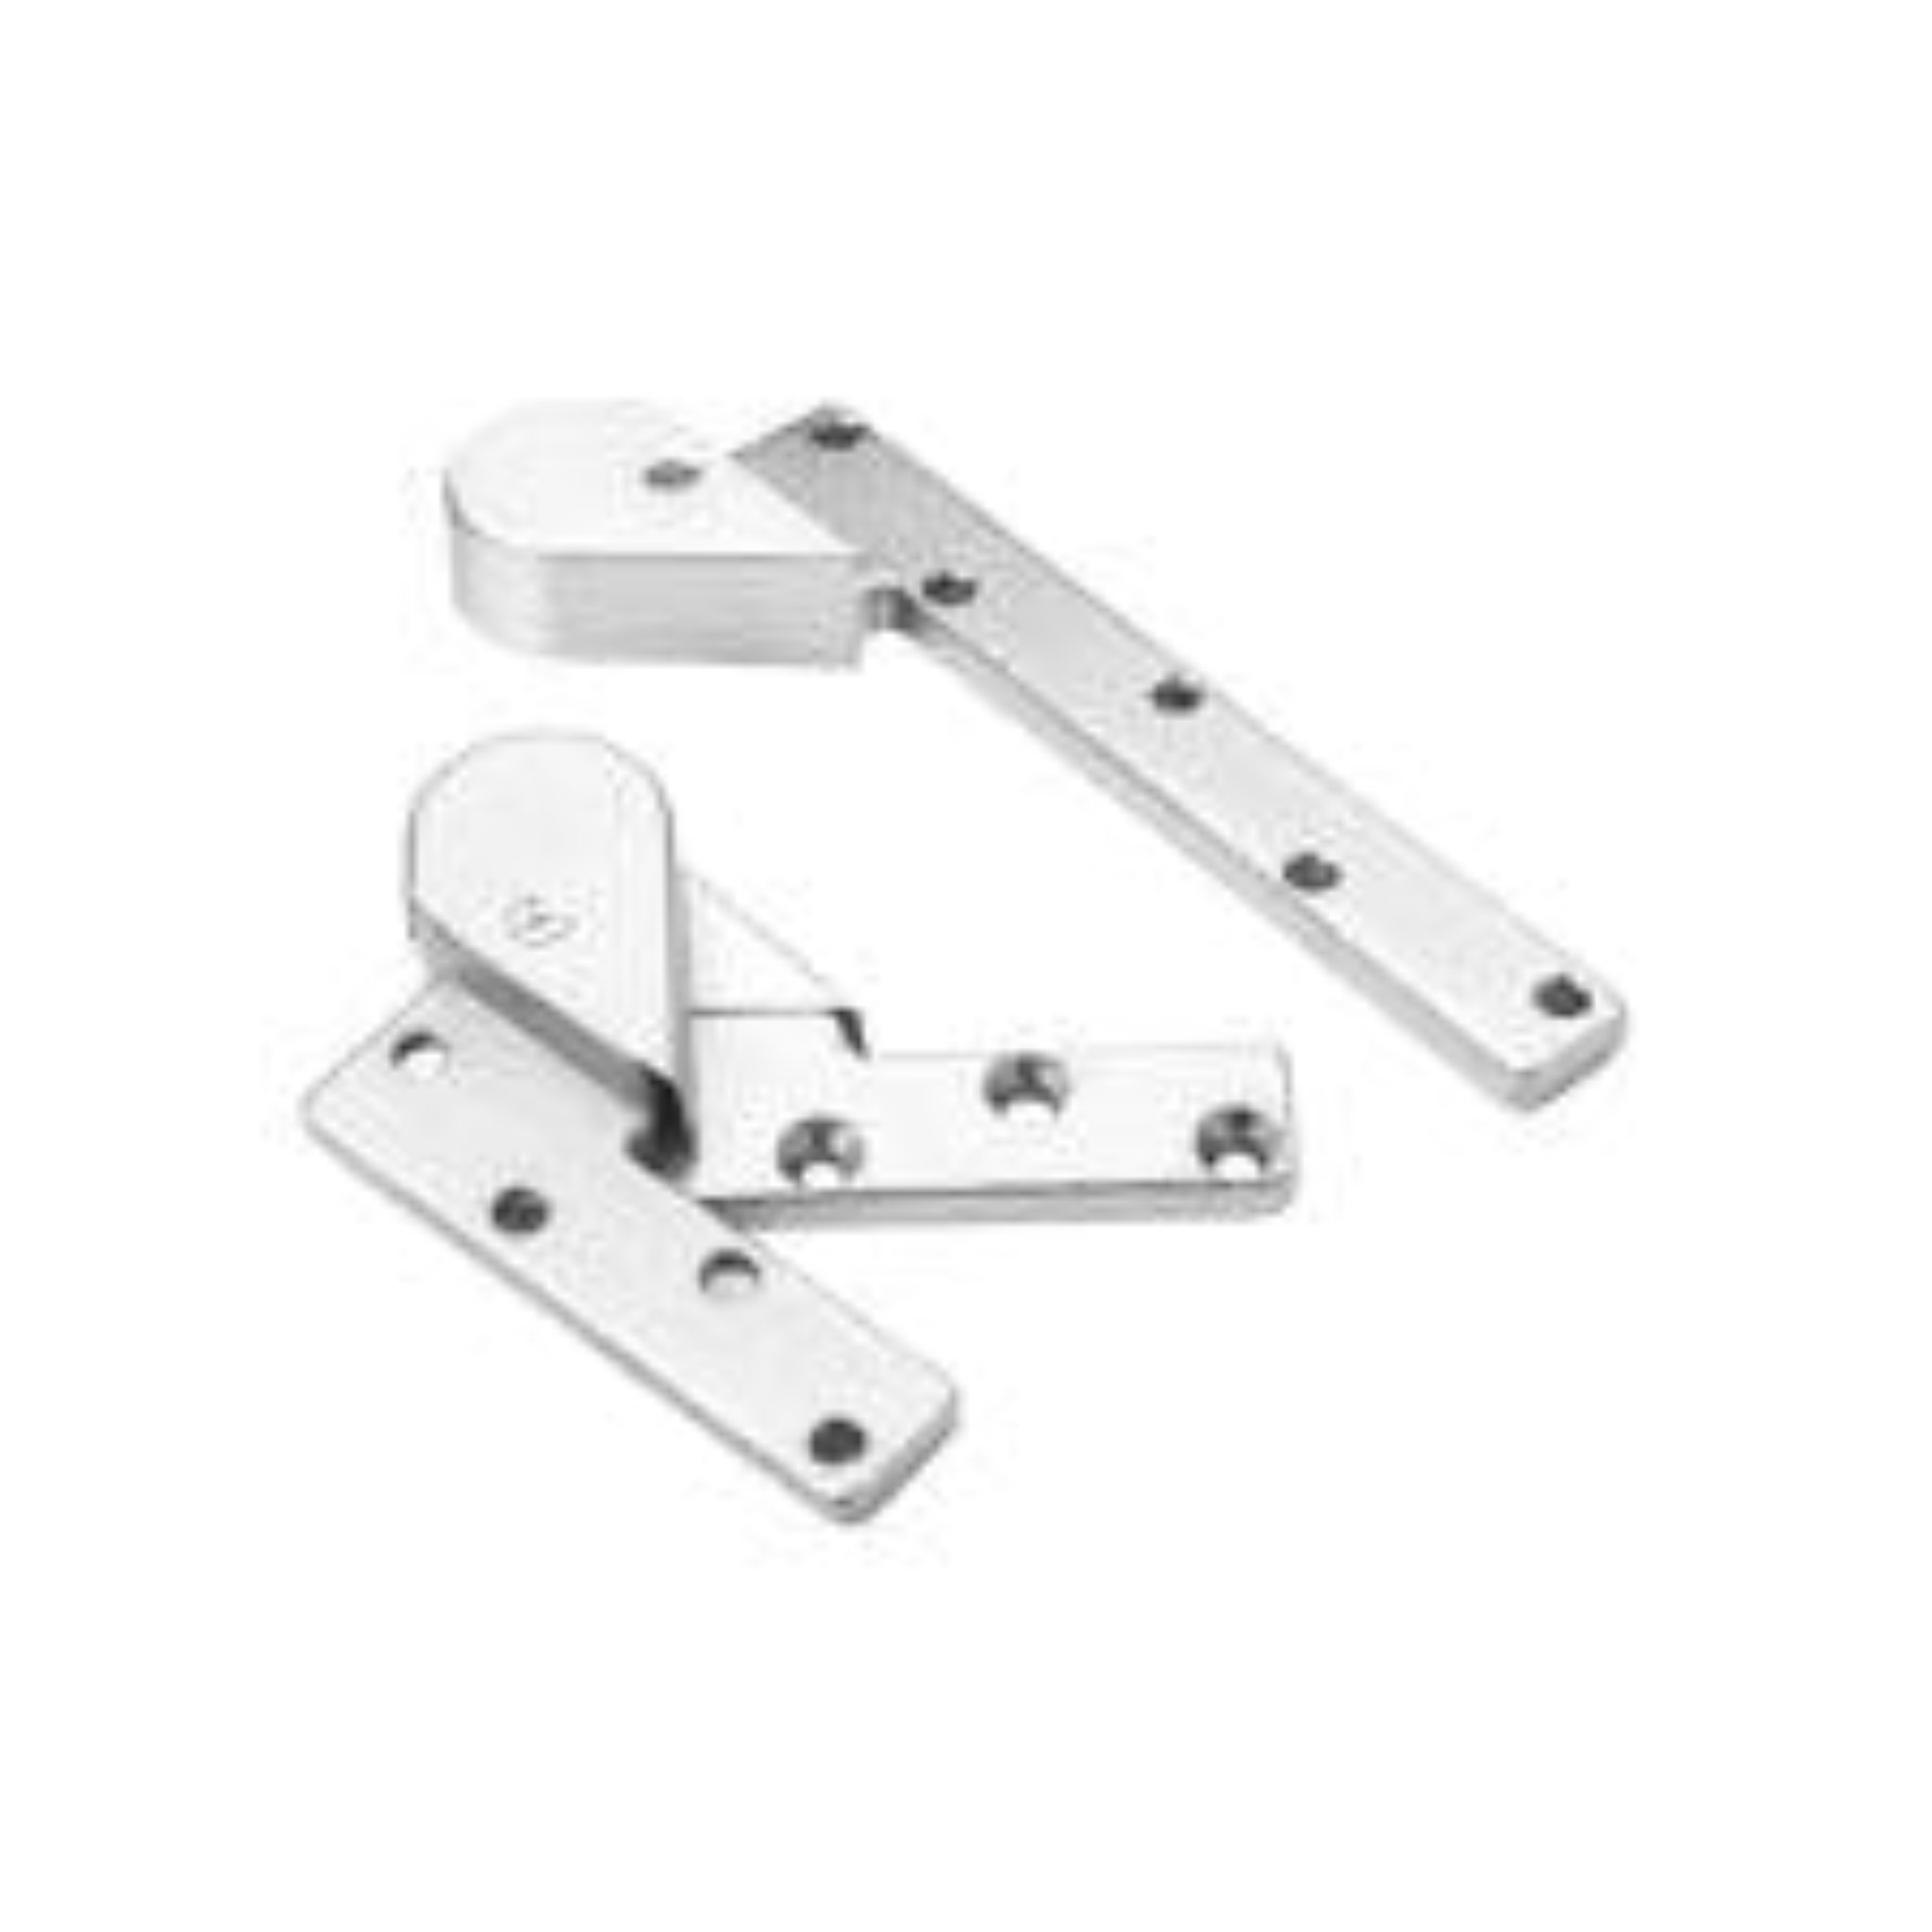 QS8801/LH, Residence, Latch Lock, Euro Cylinder, Excluding Cylinder, Stainless Steel, QS